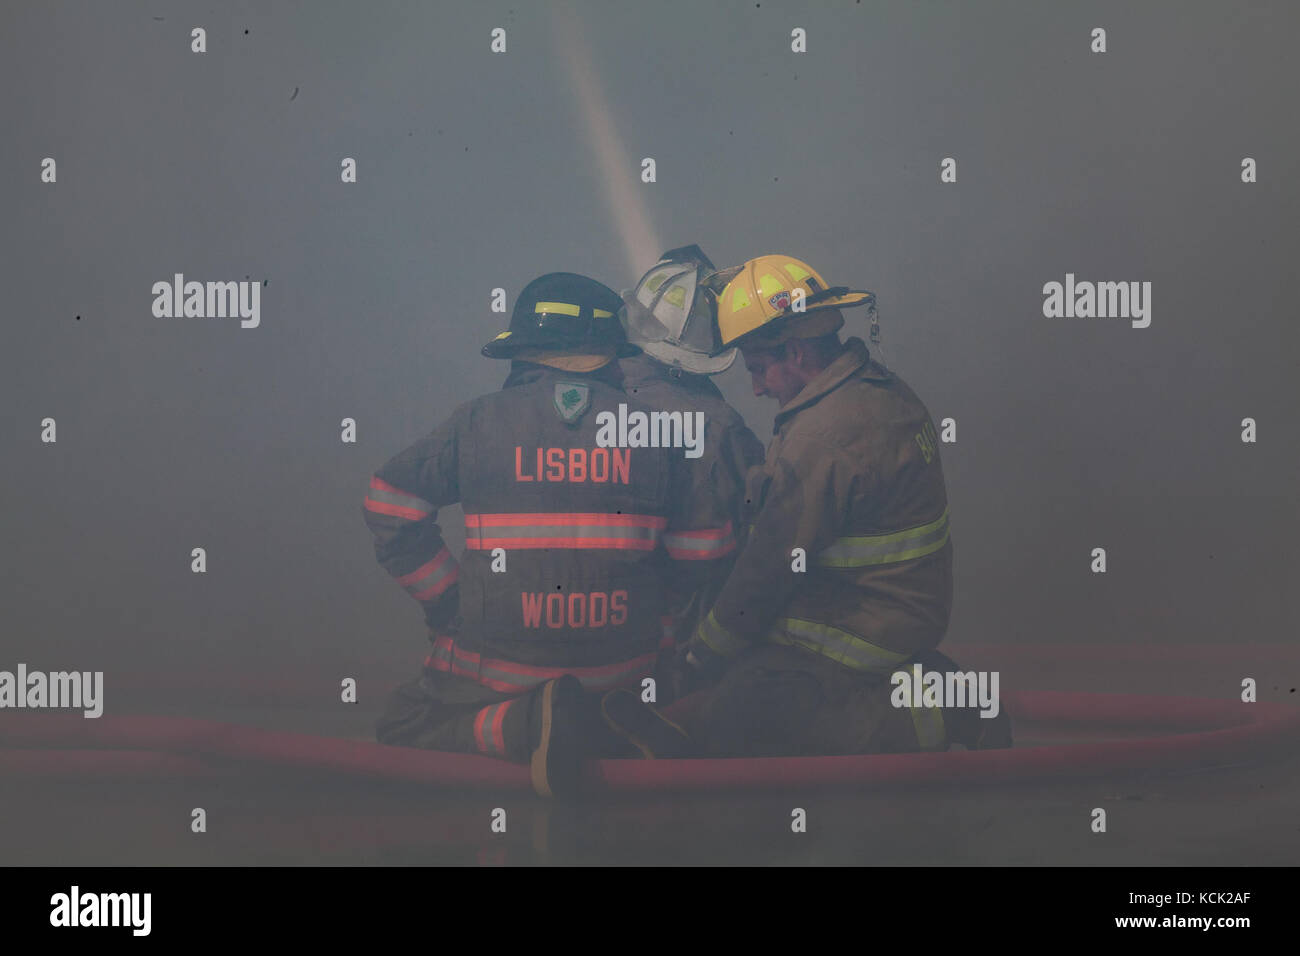 Lisbon, NH, USA. 5th Oct. 2017. Firefighters endure heat and smoke as they battle a major house fire of unknown origin in Lisbon, NH, USA. Credit: Art Phaneuf/Alamy Live News Stock Photo